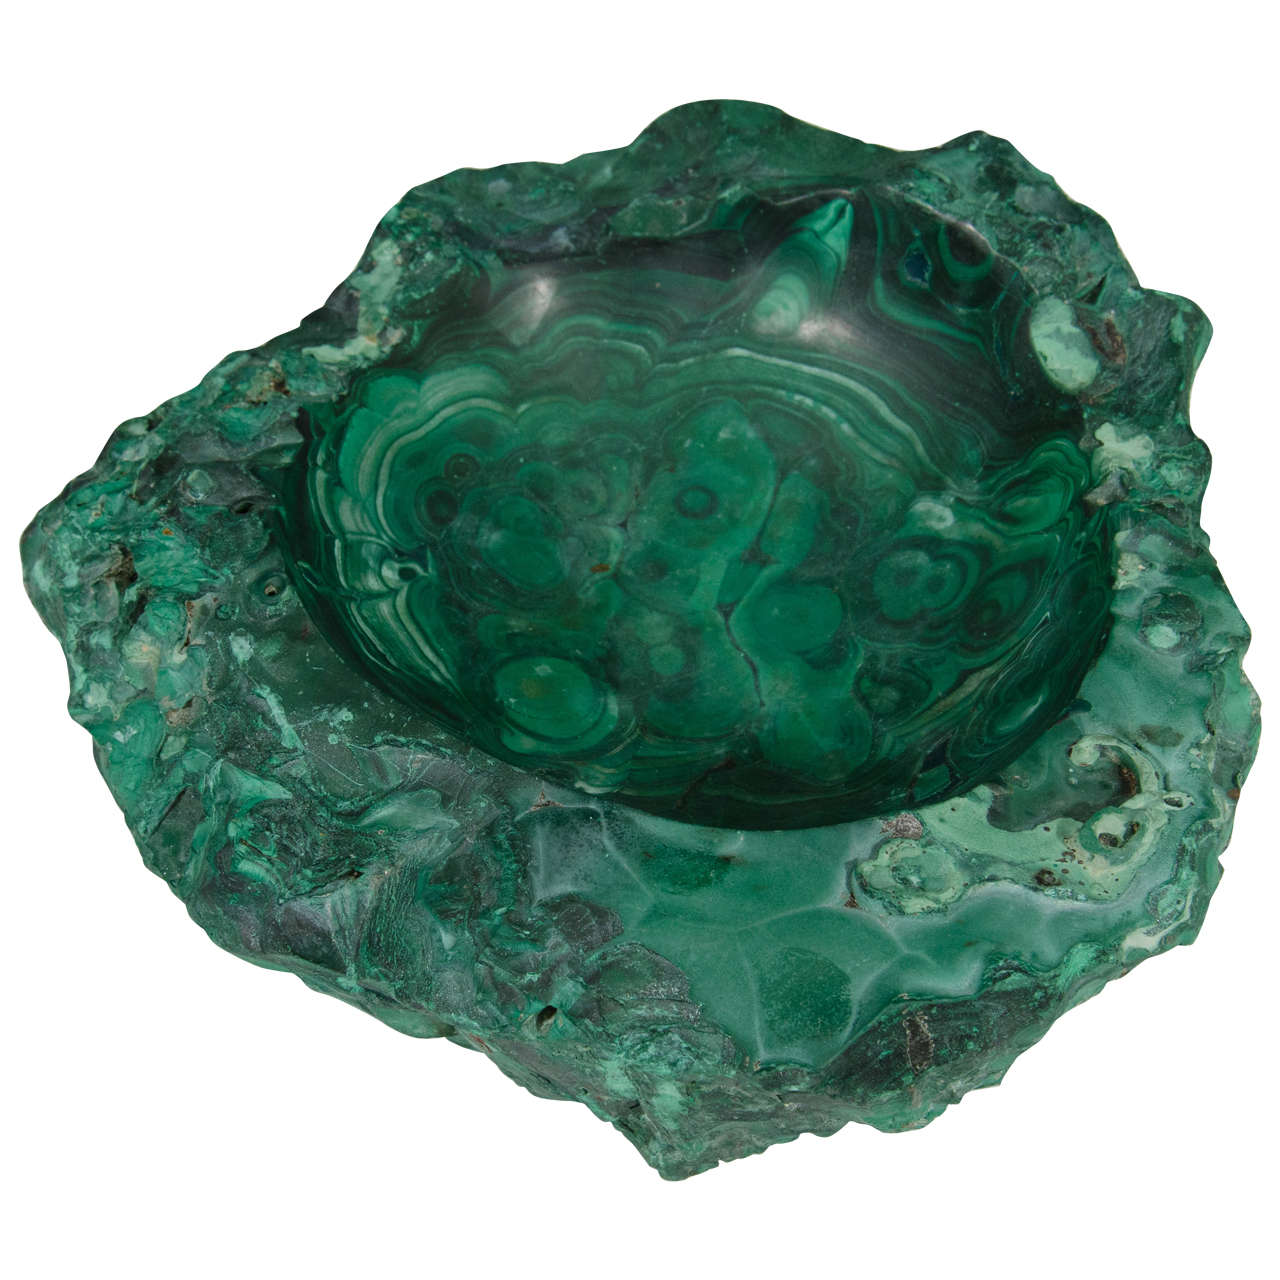 Vintage Malachite Ash Tray or Deep Dish with Green Swirl Detailing